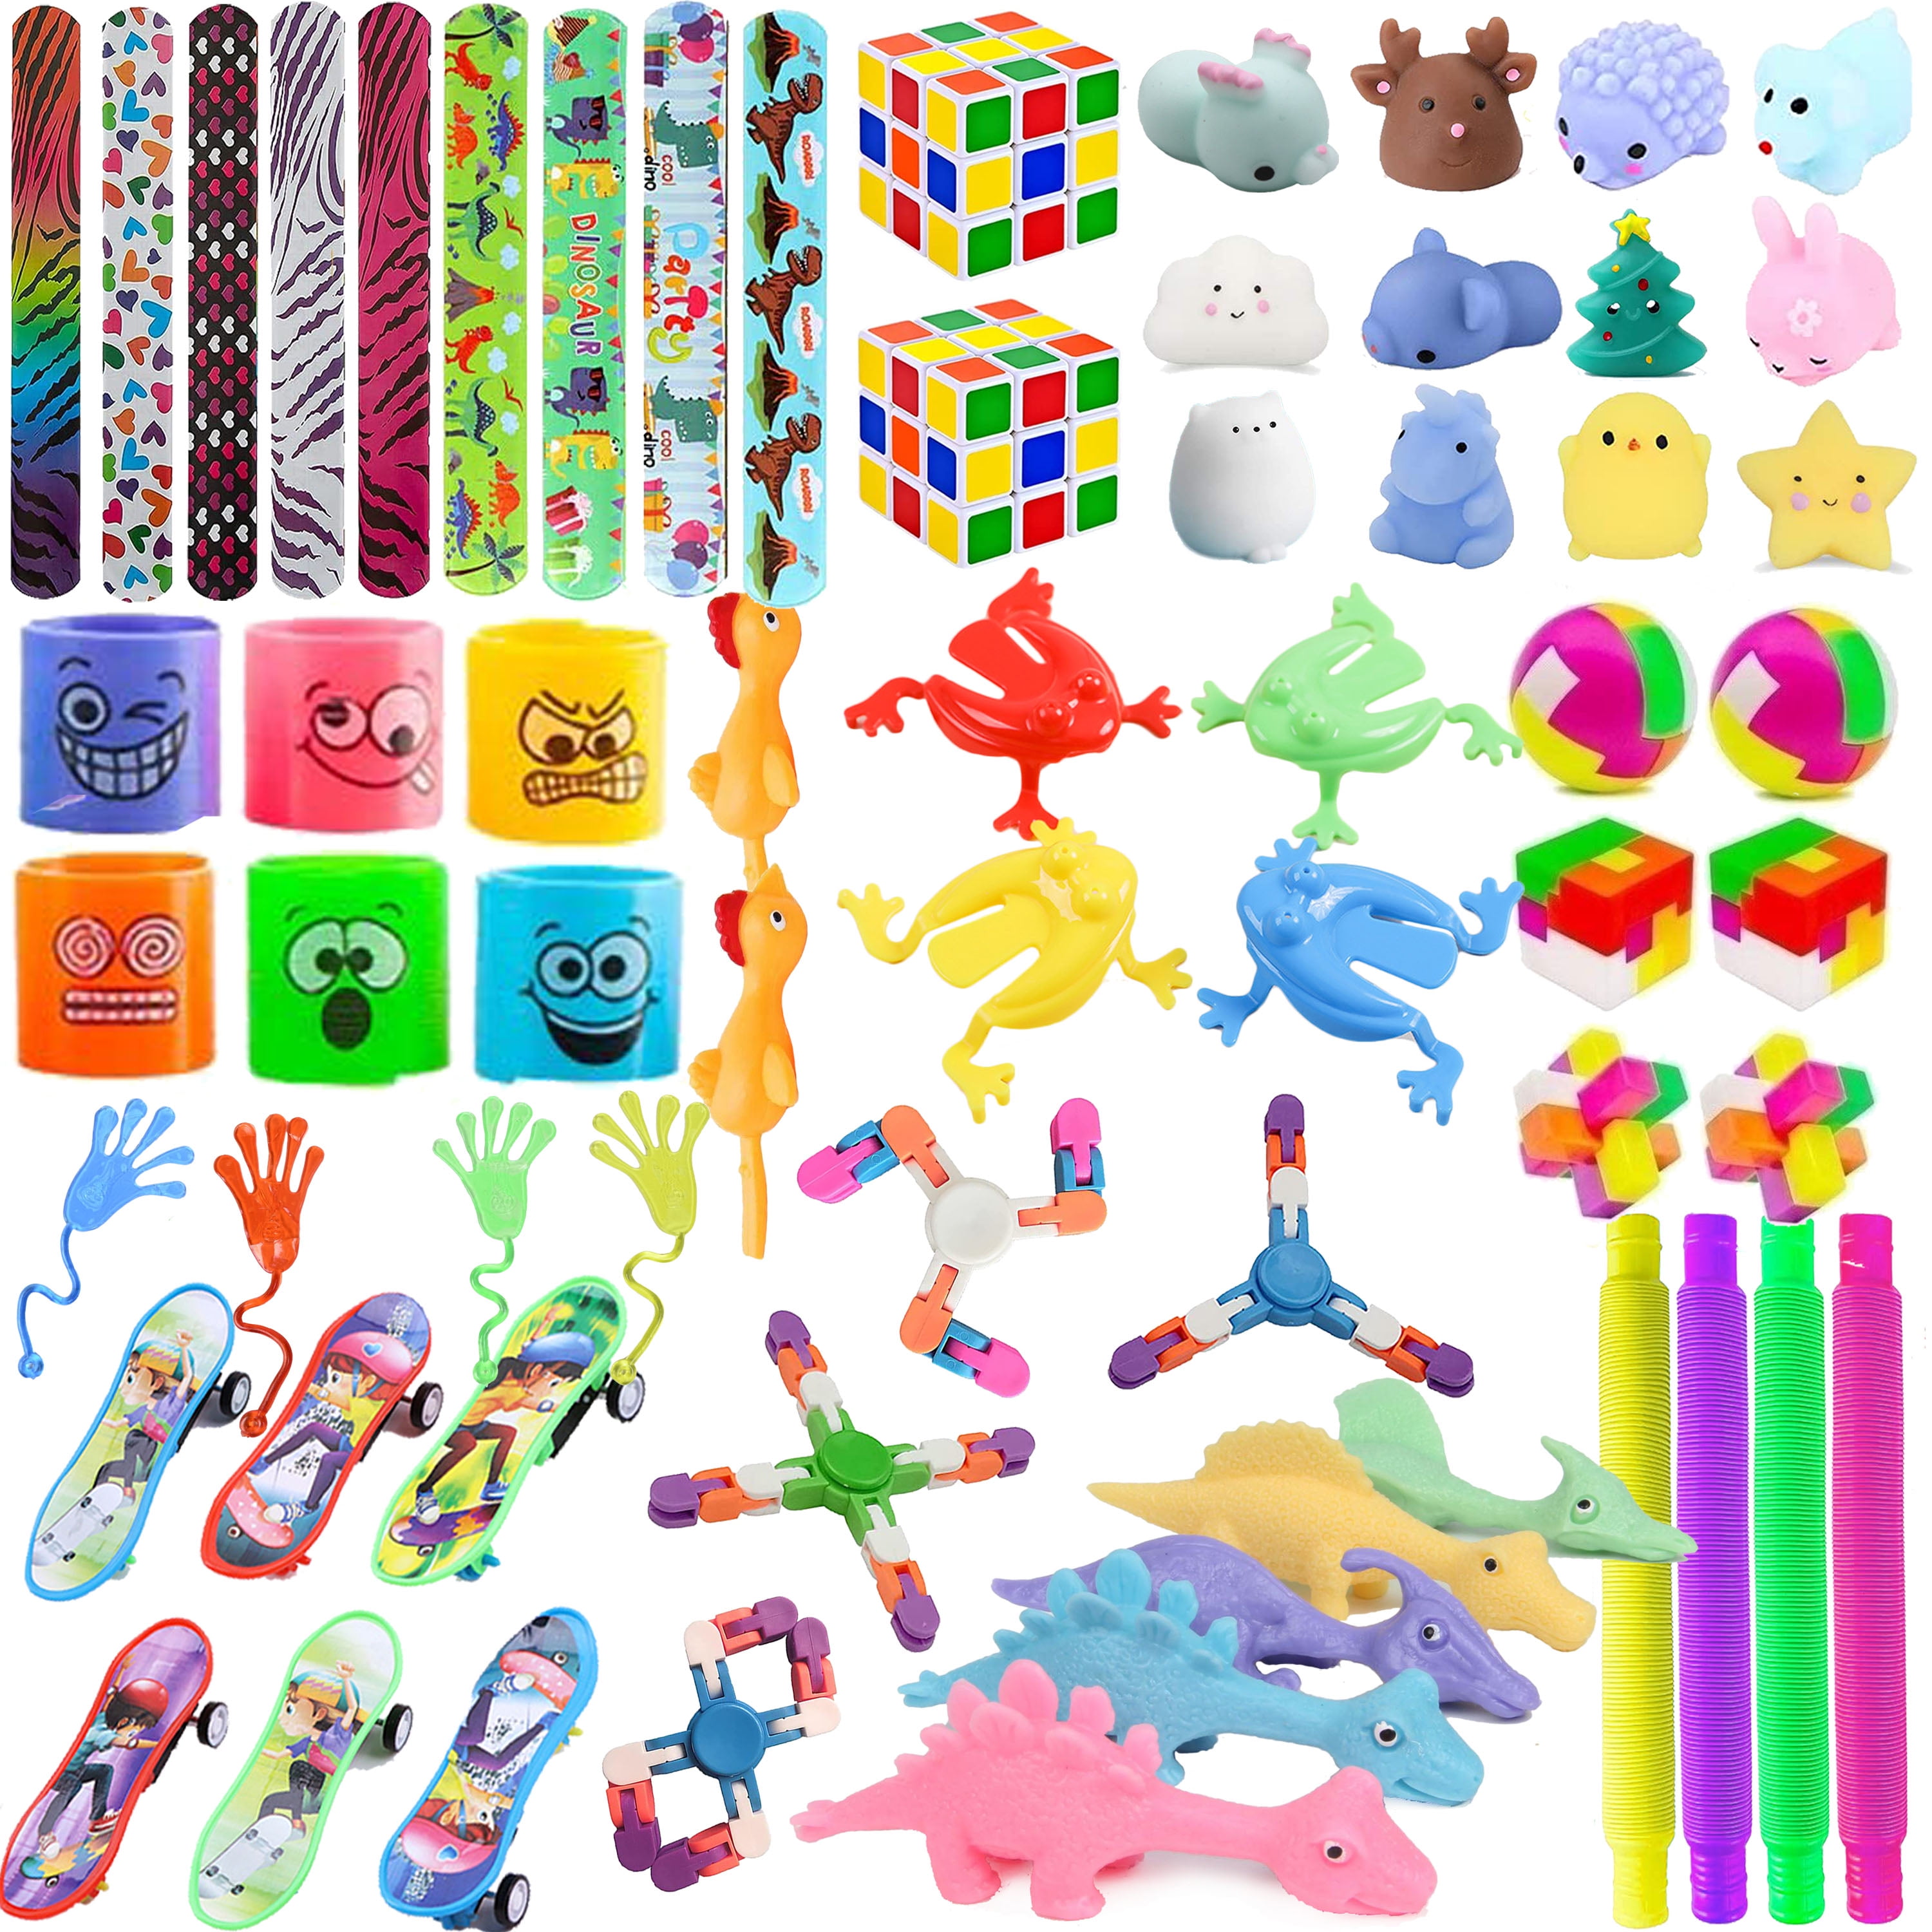  Christmas Toys Assortment For Kids Party Favors, Stocking  Stuffers for Kids,Goodie Bag Stuffers, Gifts Prizes For Classroom Rewards,  Stuff Fillers for Advent Calendar, Birthday Pinata Stuffers : Toys & Games